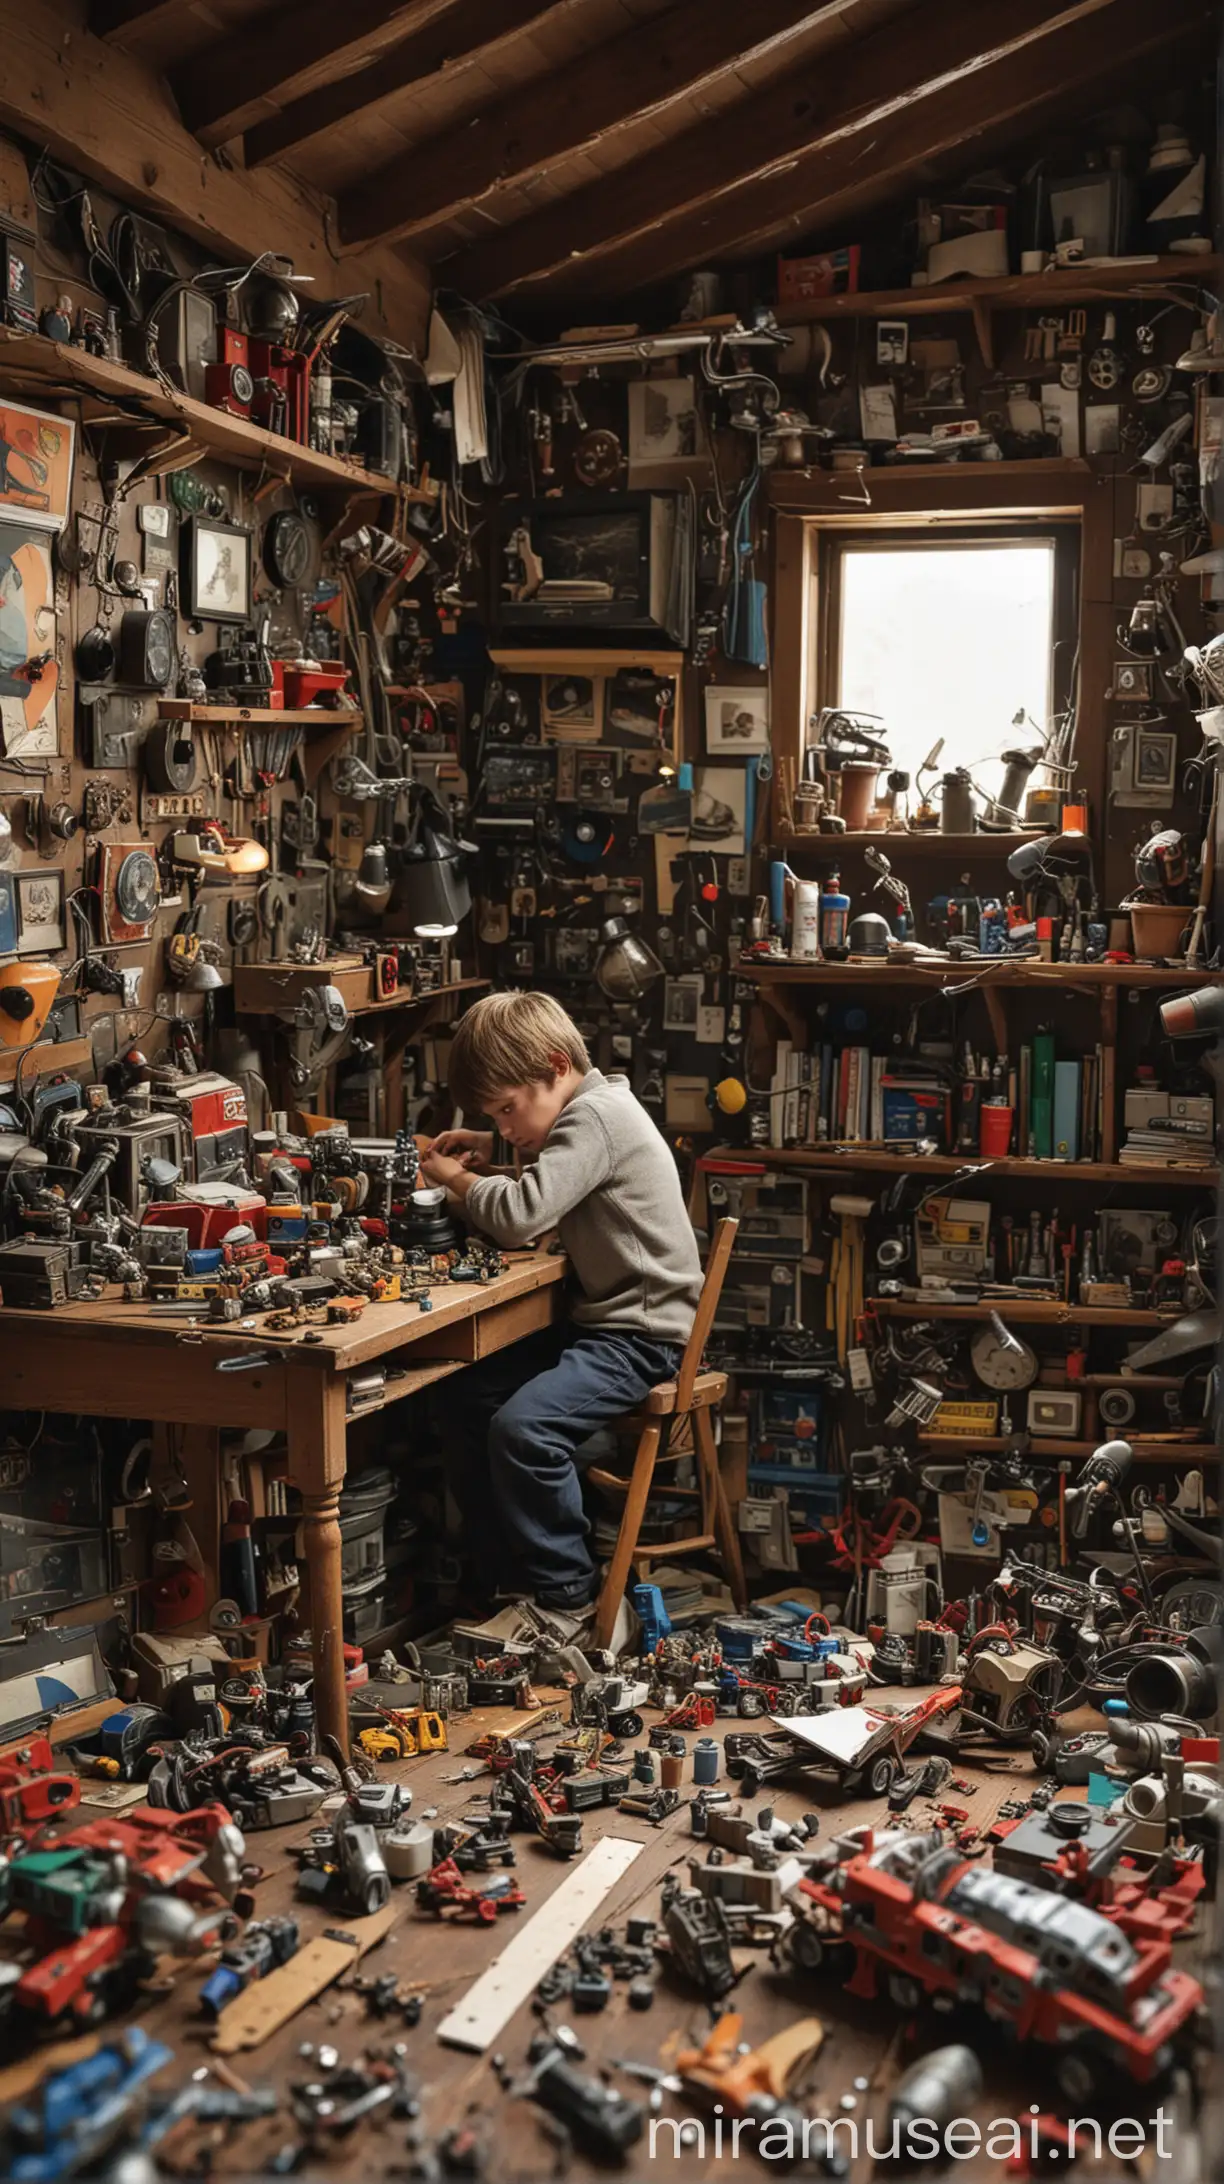 In a cozy corner of his room, a young boy hunches over a cluttered workbench. His nimble fingers assemble tiny pieces—a cockpit here, thrusters there—gradually shaping a miniature spaceship model. 